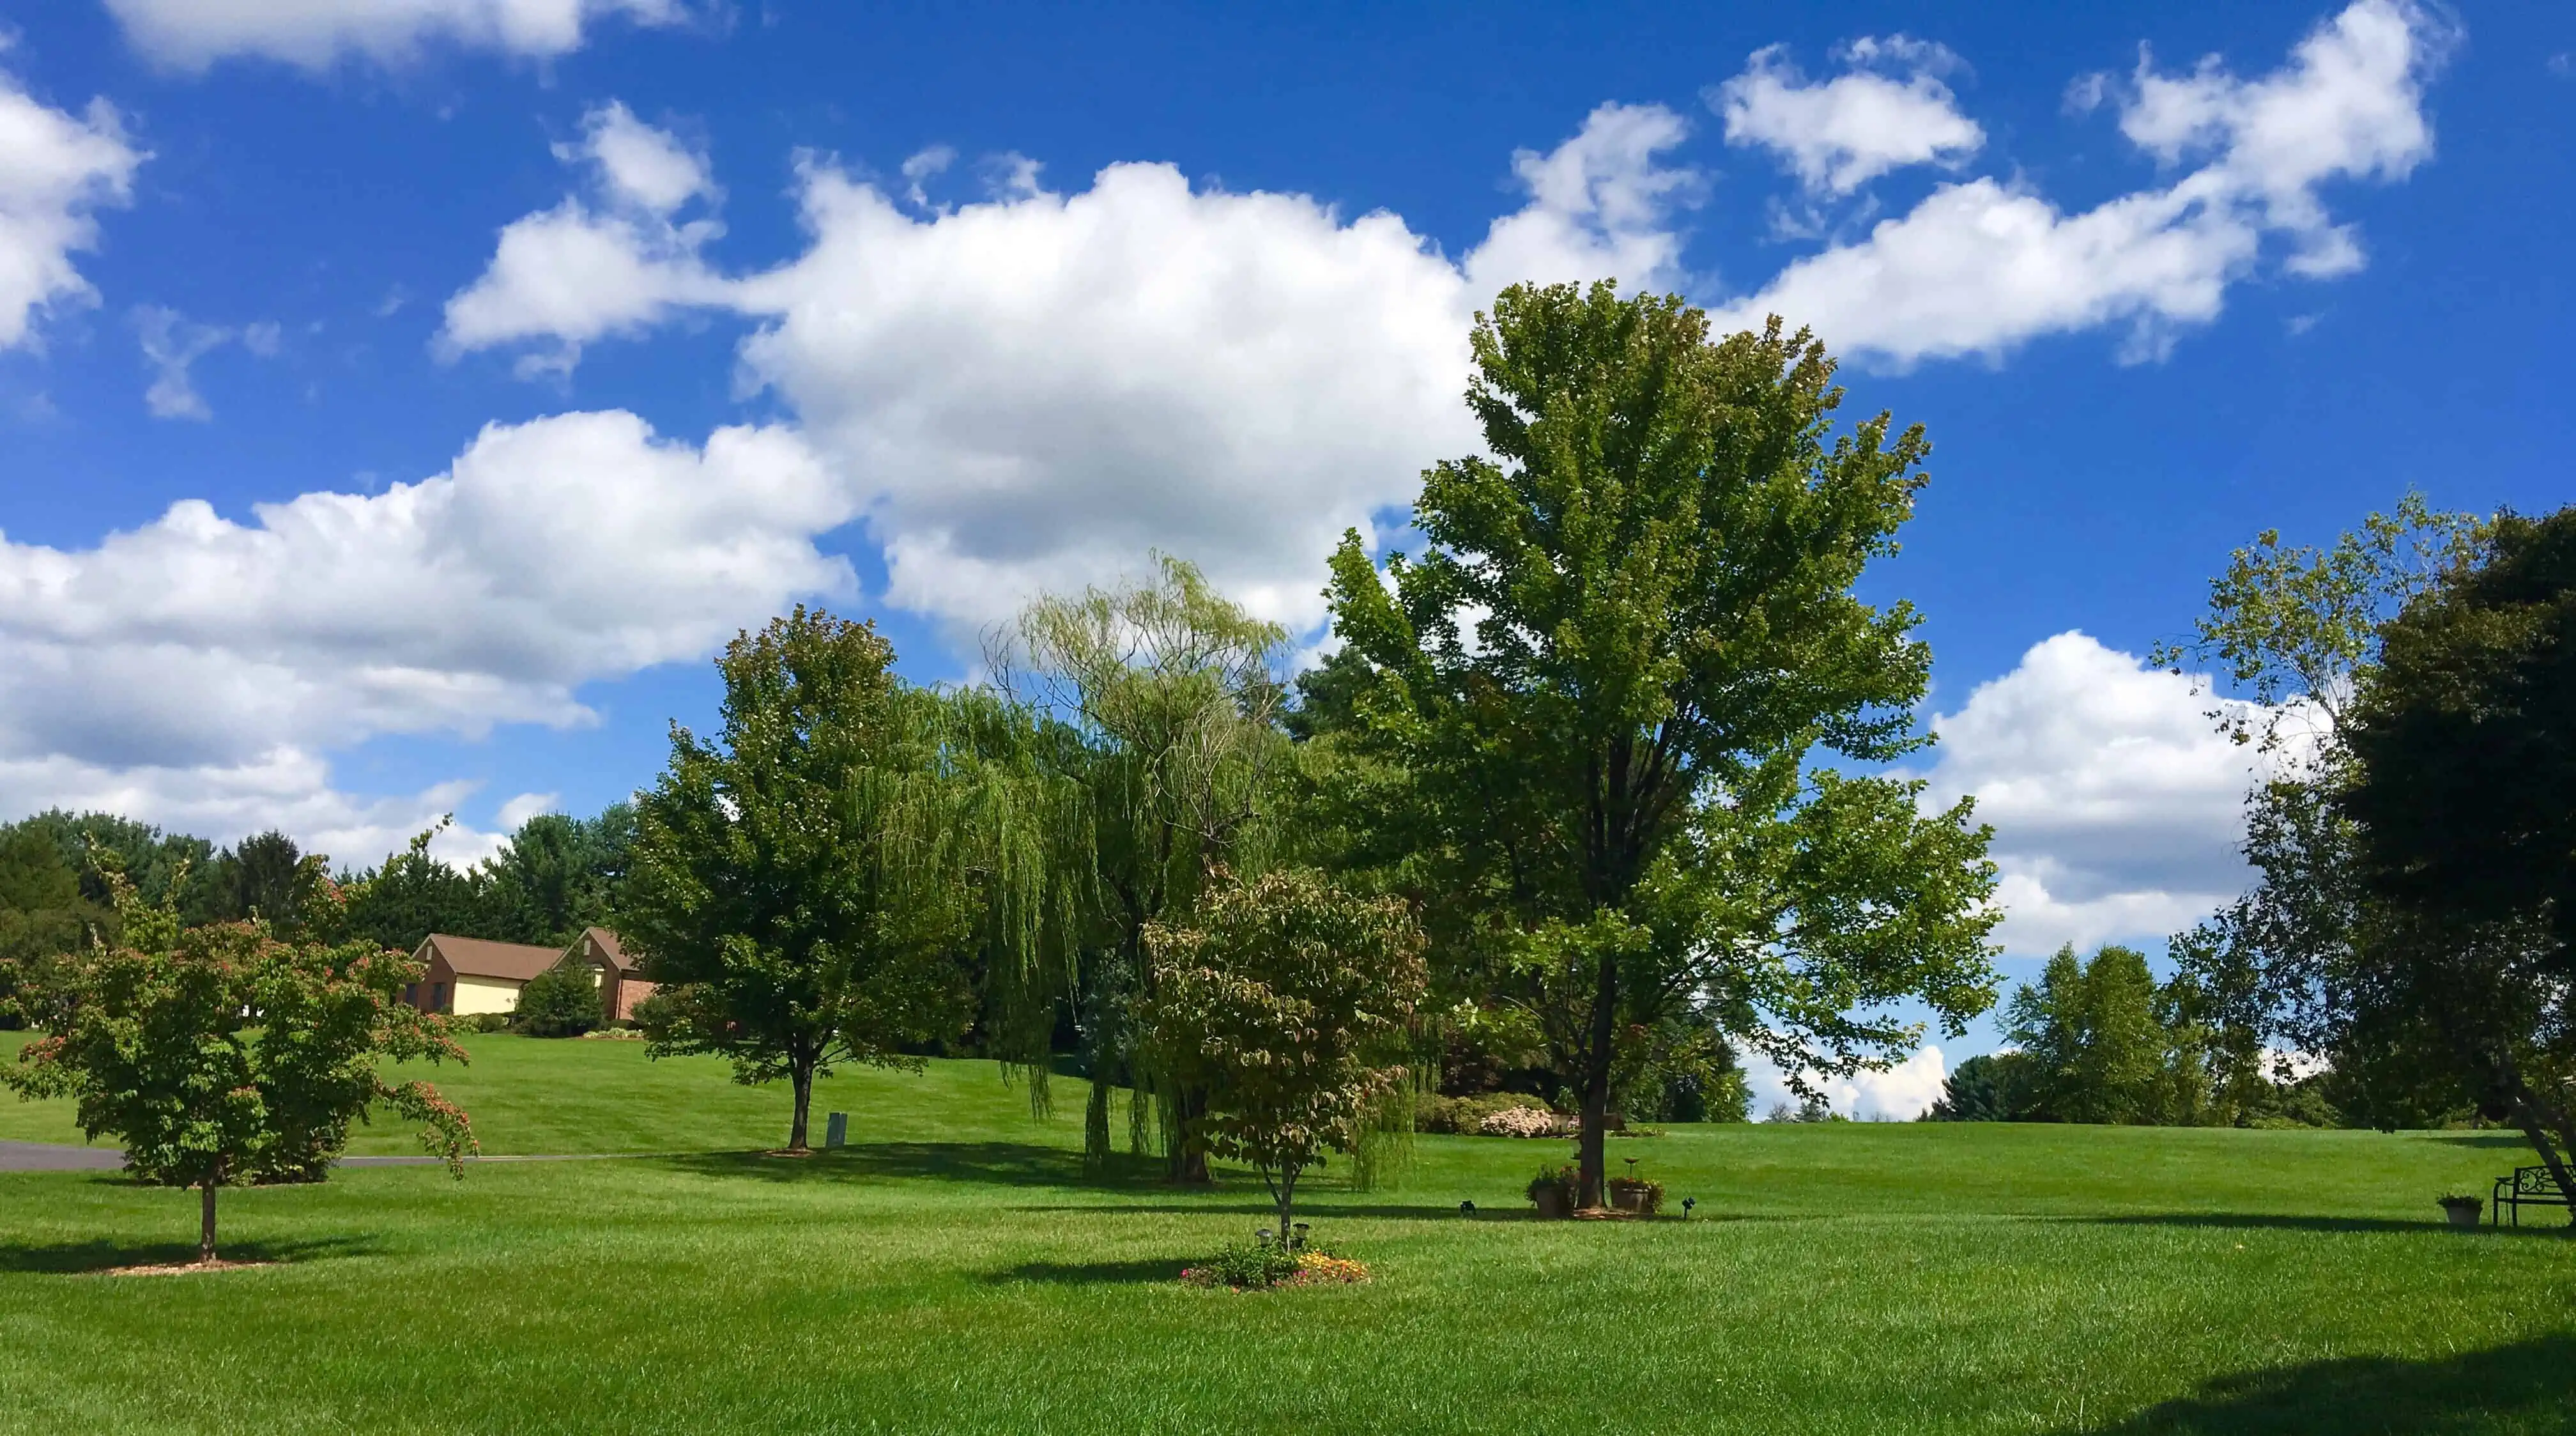 Beautiful yard with trees and gorgeous blue sky with clouds